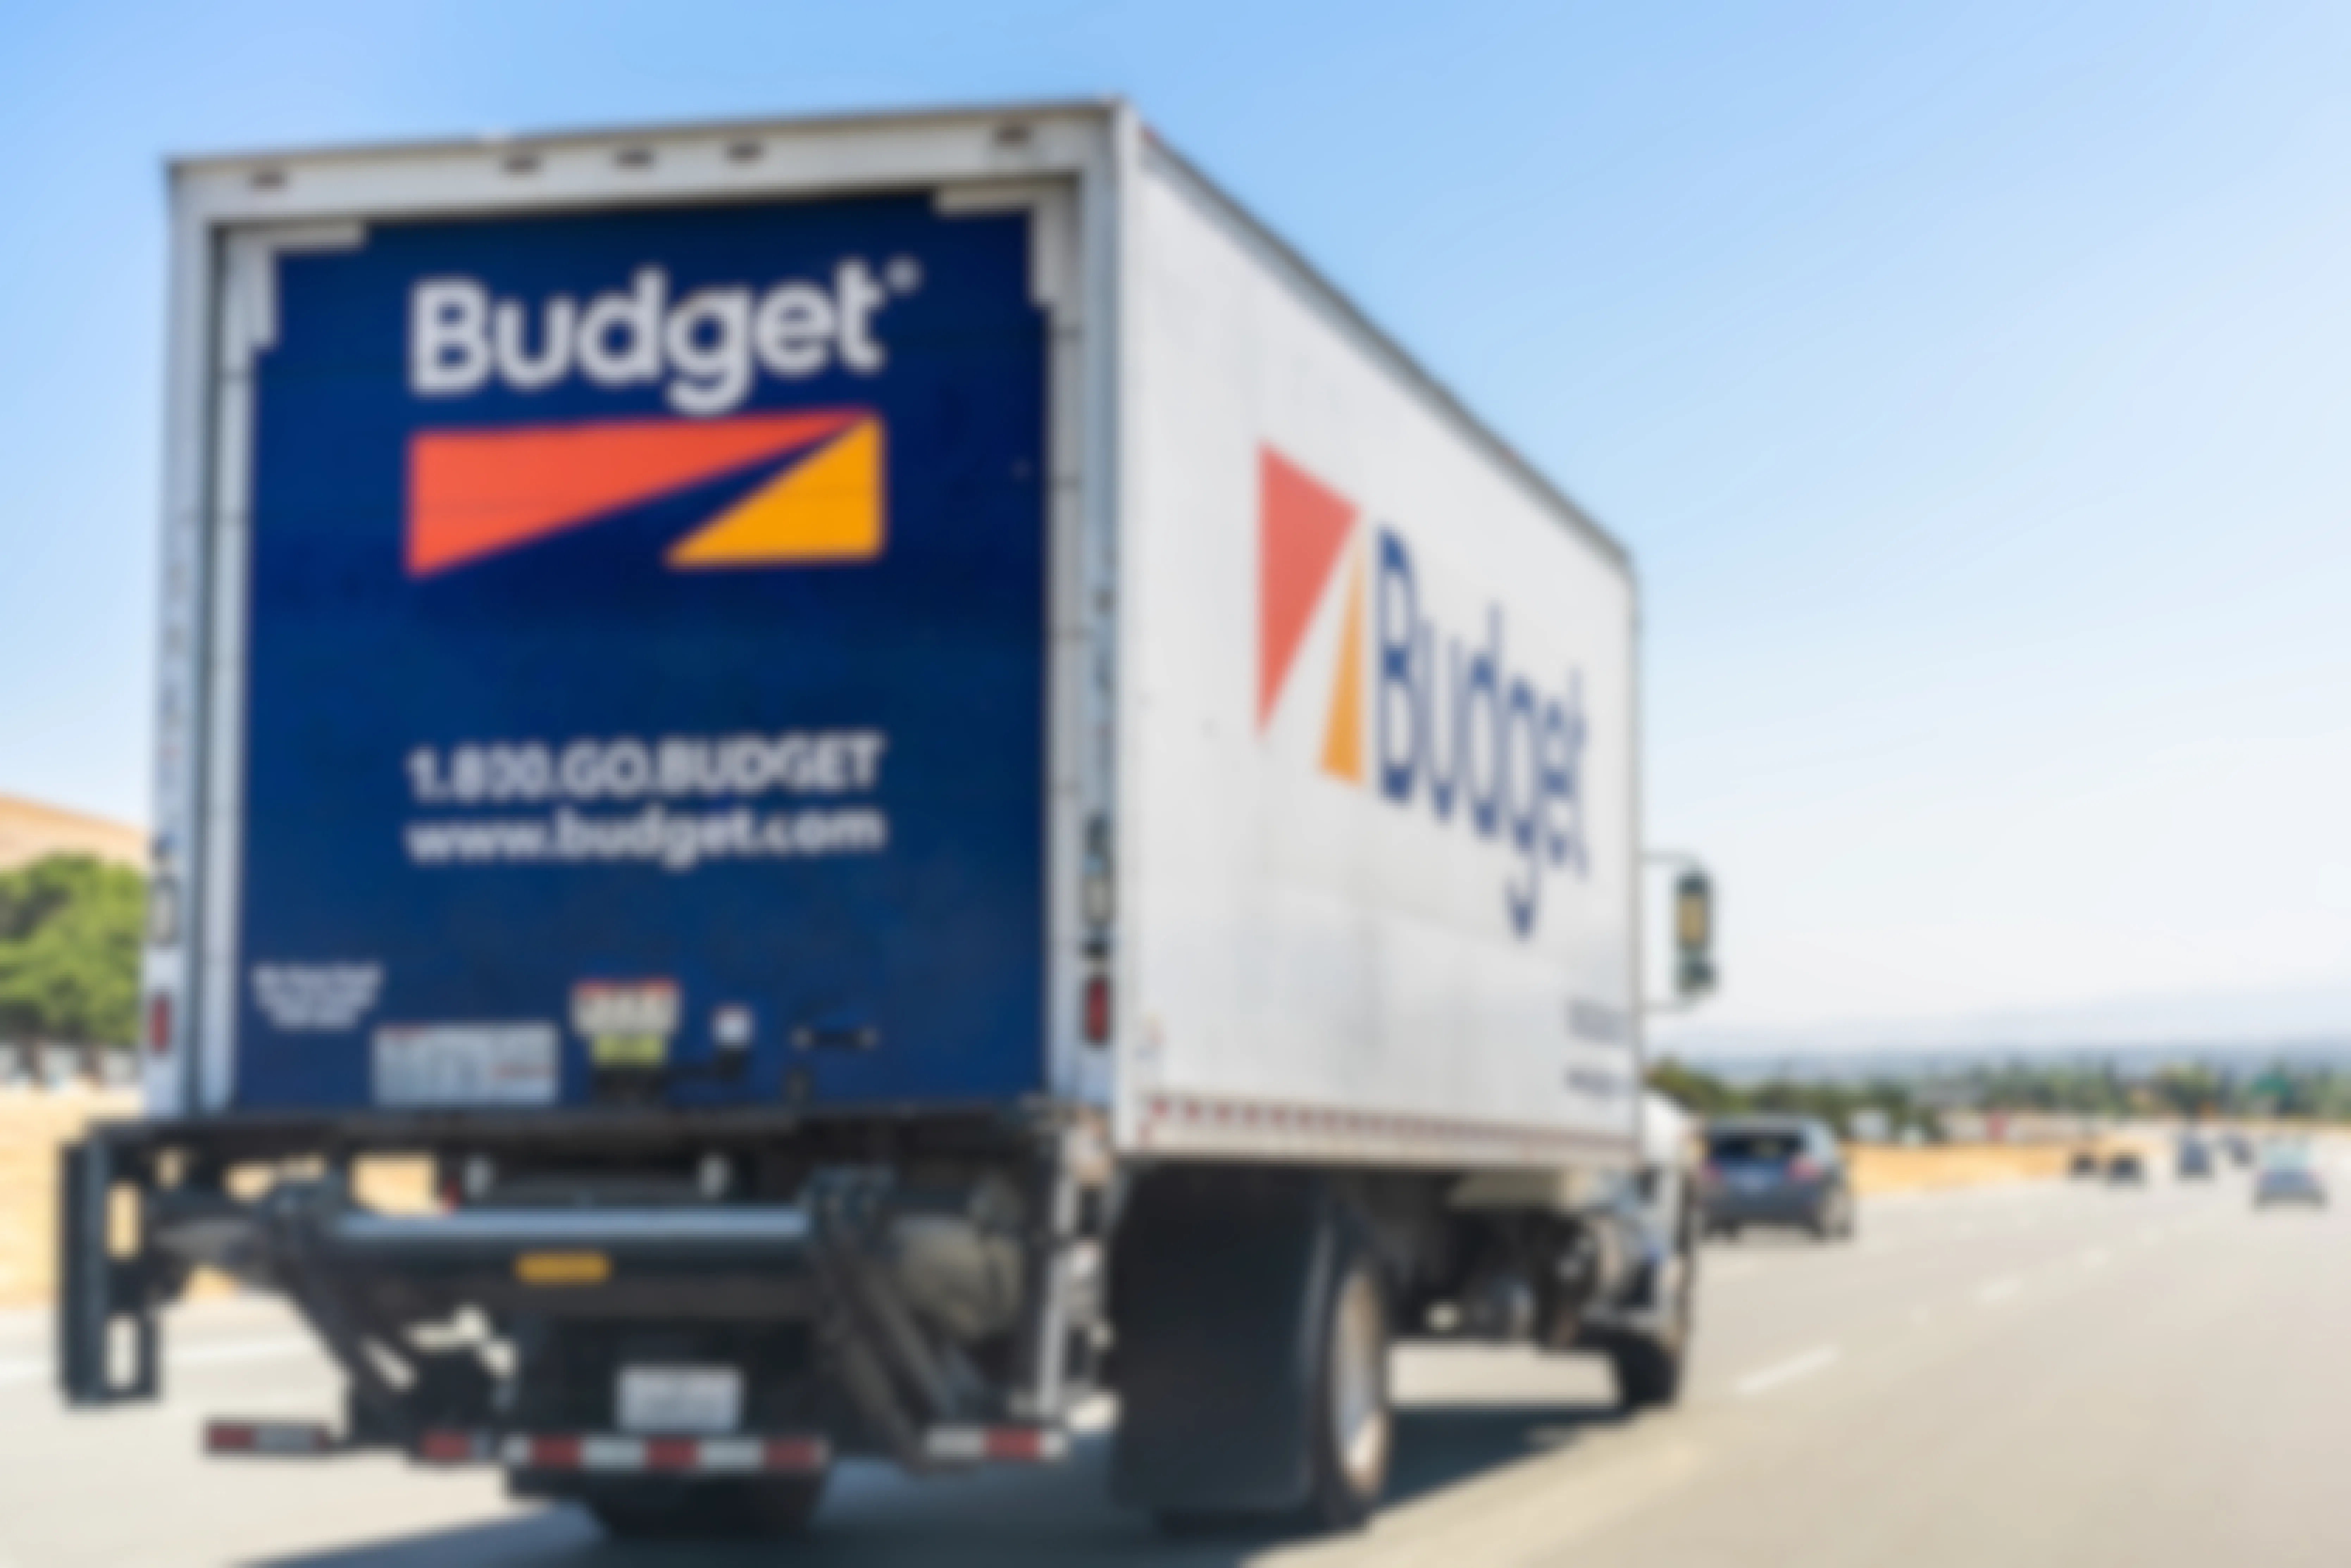 Budget moving truck driving on the freeway